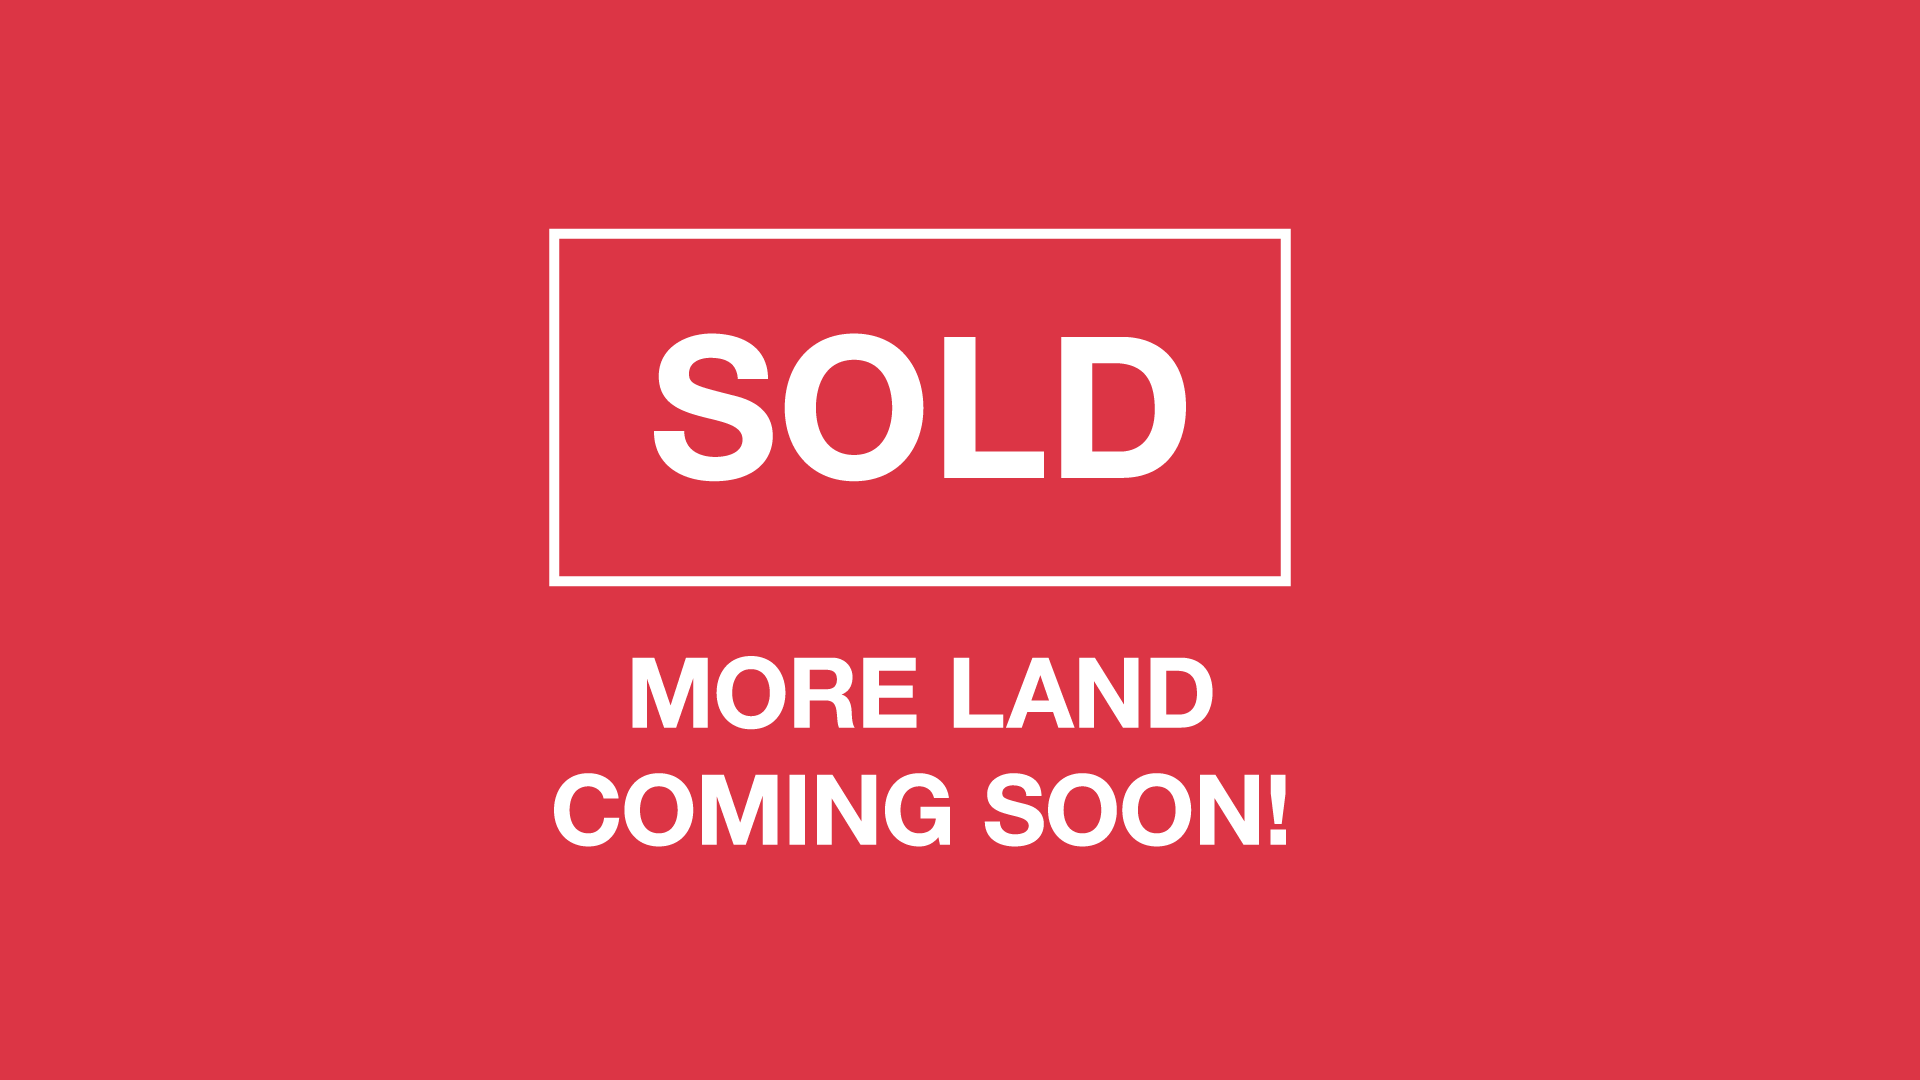 SOLD - More land coming soon